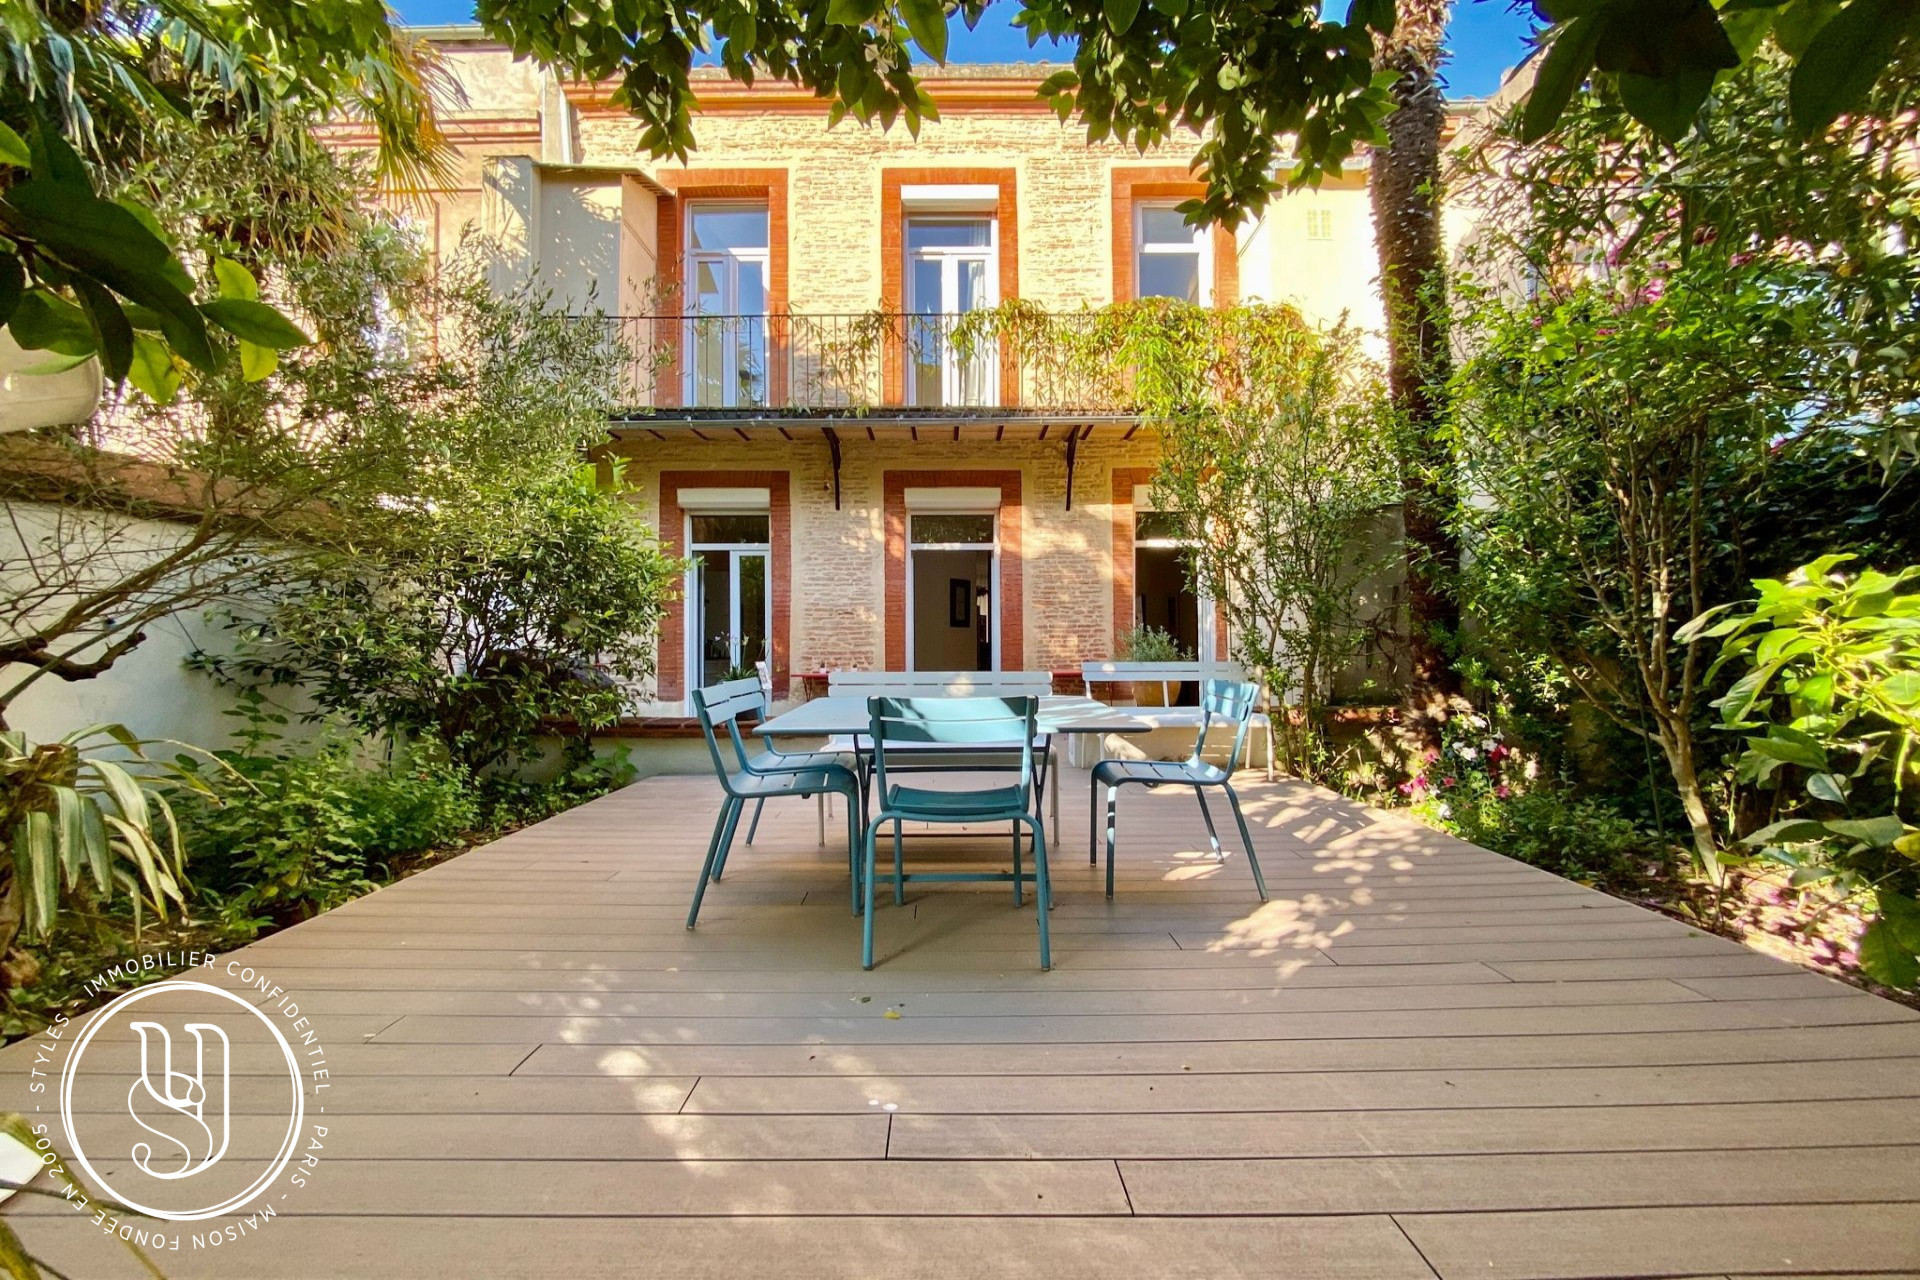 Toulouse - Chalets - under offer, A superb family townhouse with garden   - image 1